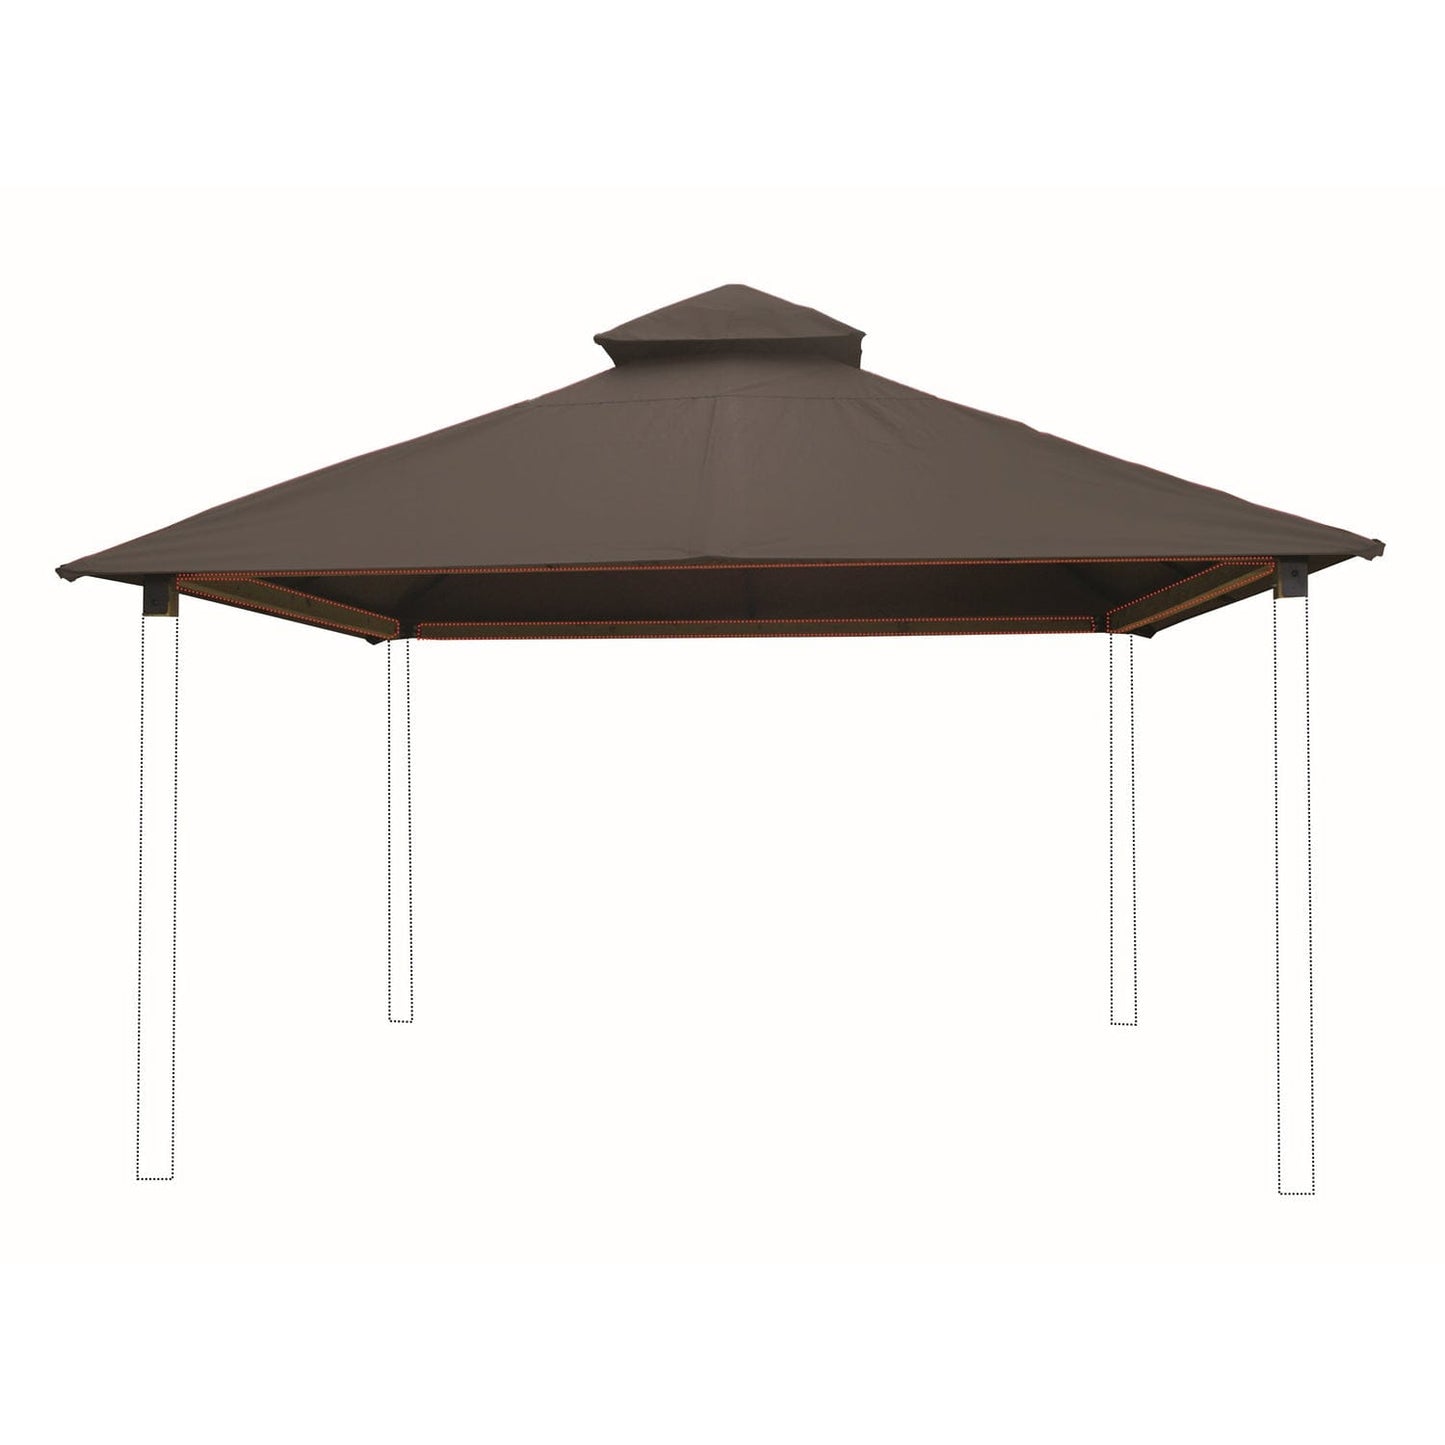 Riverstone Industries Soft Top Gazebos 12FT X 12FT Riverstone | ACACIA Gazebo Roof Framing and Mounting Kit With OutDURA Canopy - Taupe AGOK12-TAUPE